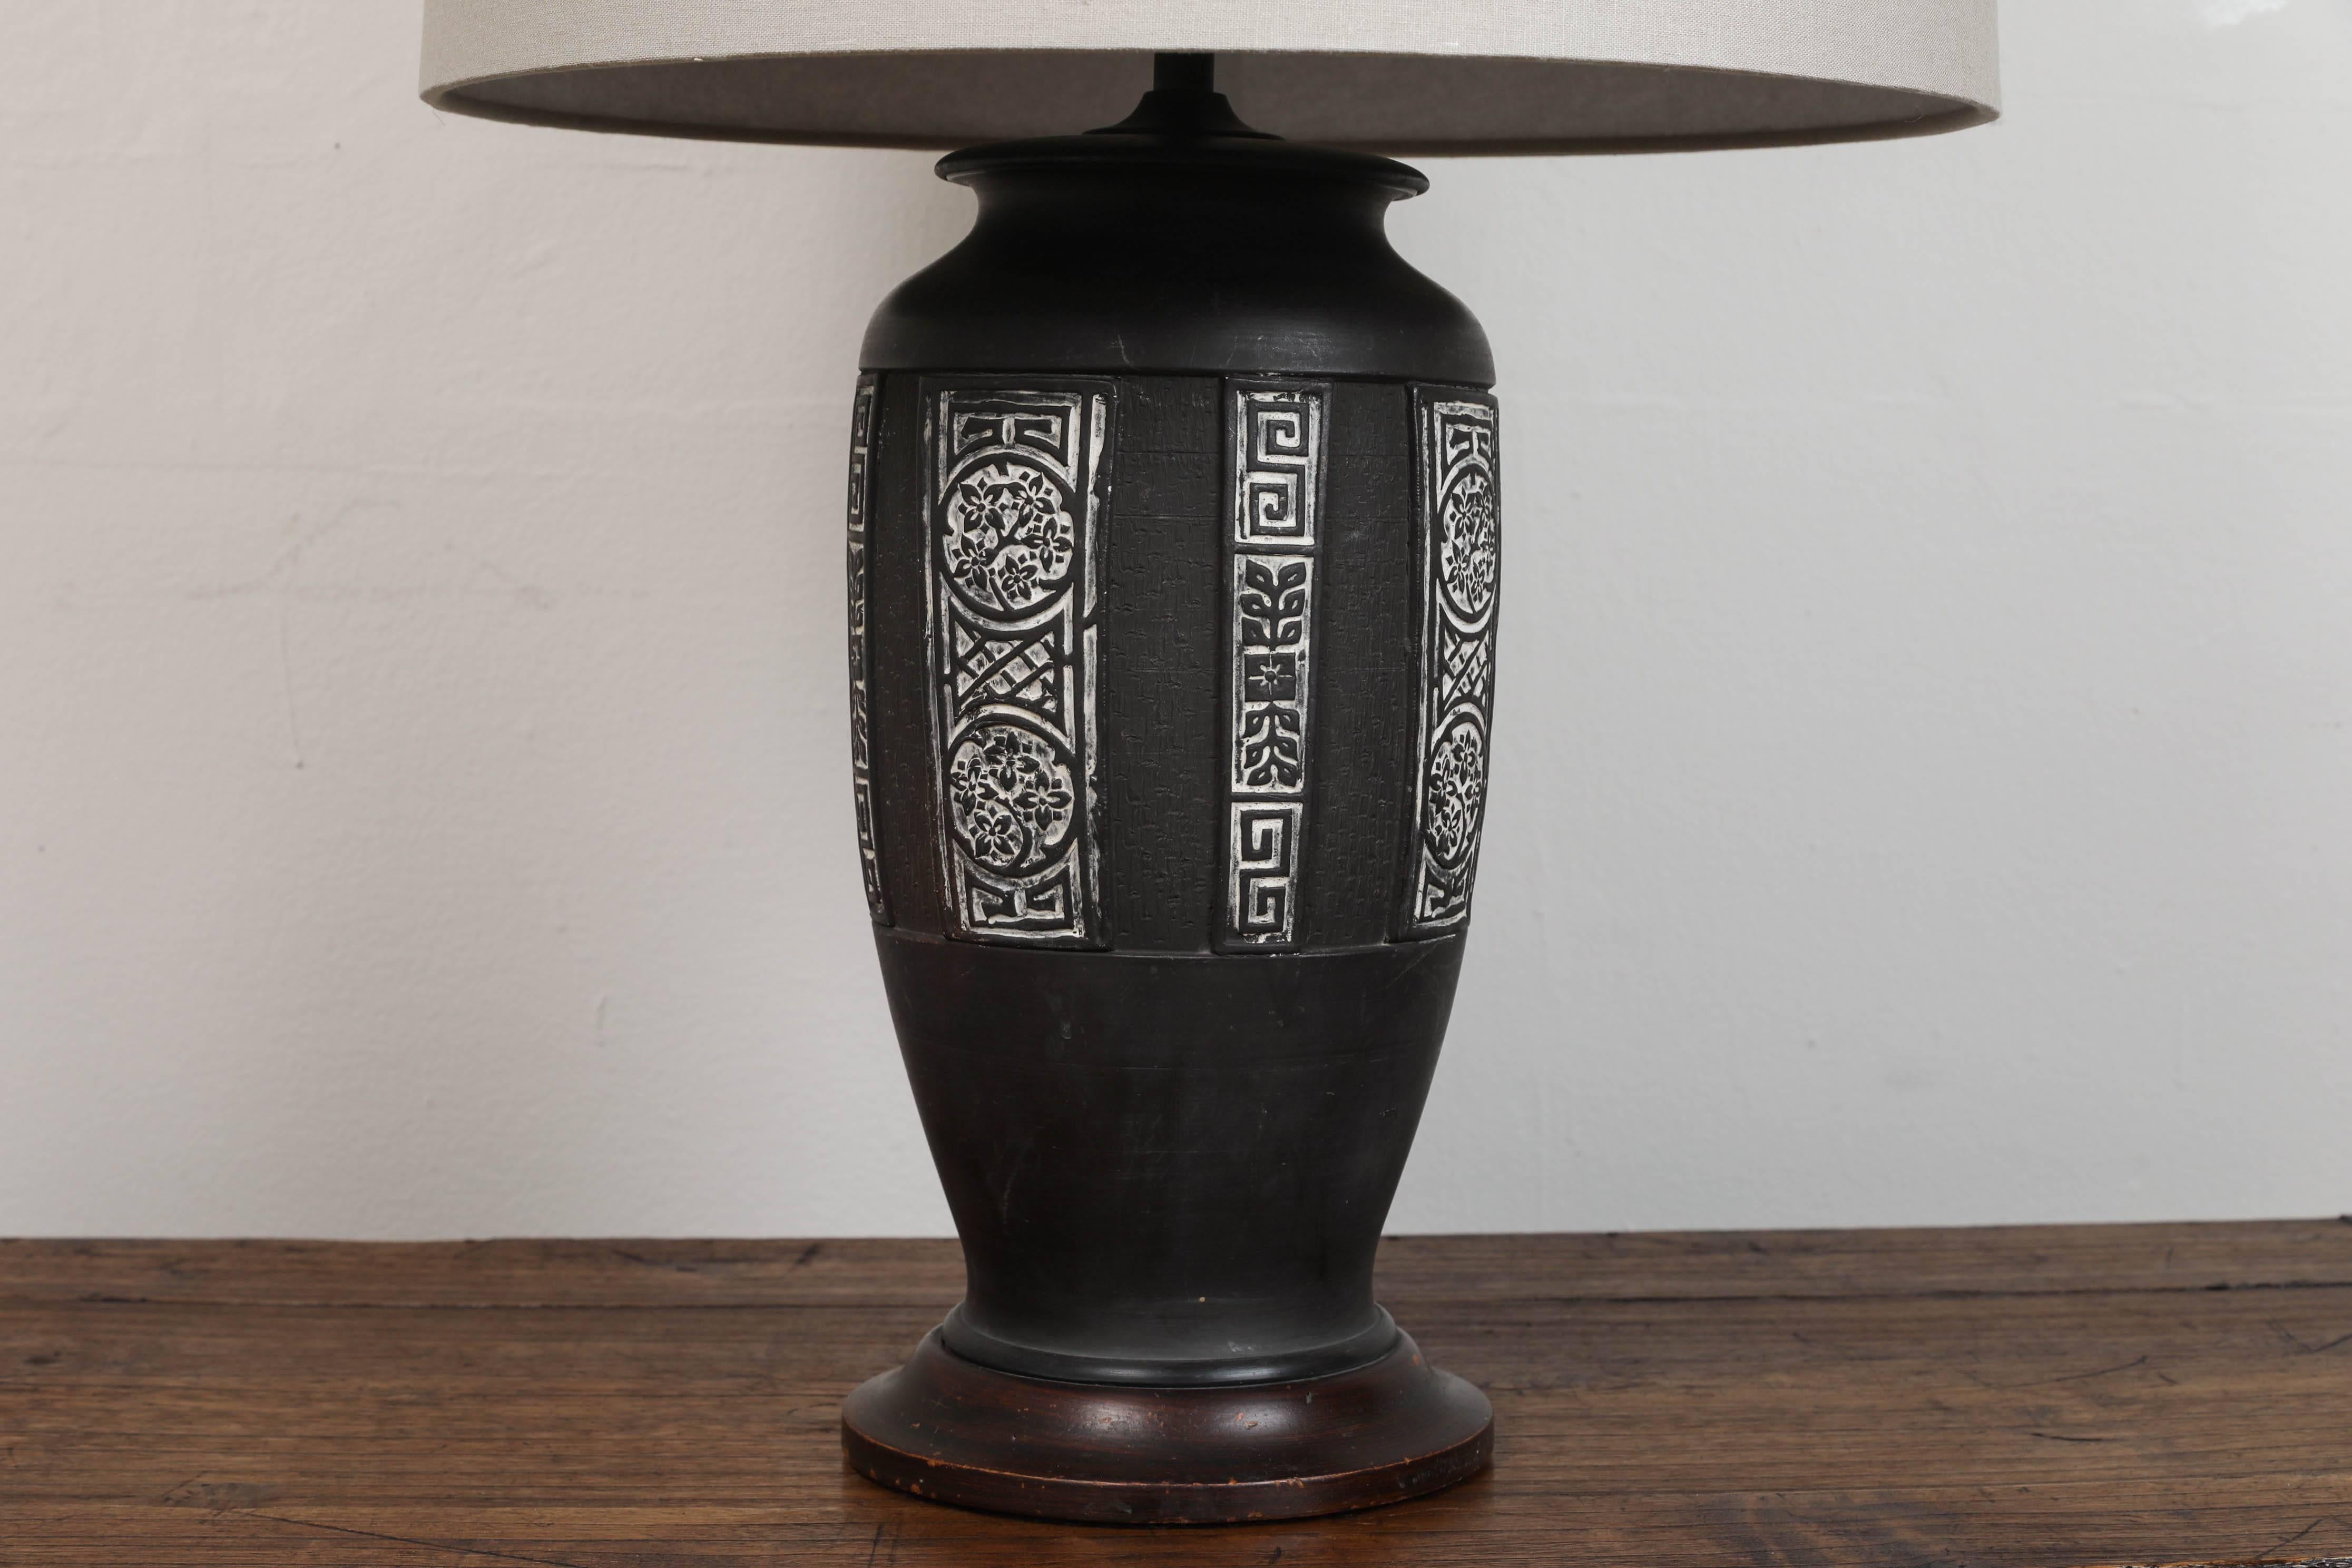 Vintage Chinese black ceramic. Inset designs detailed with white. Stands on a wood base. Updated hardware and twist cord wiring. Custom taupe linen shade with diffuser.